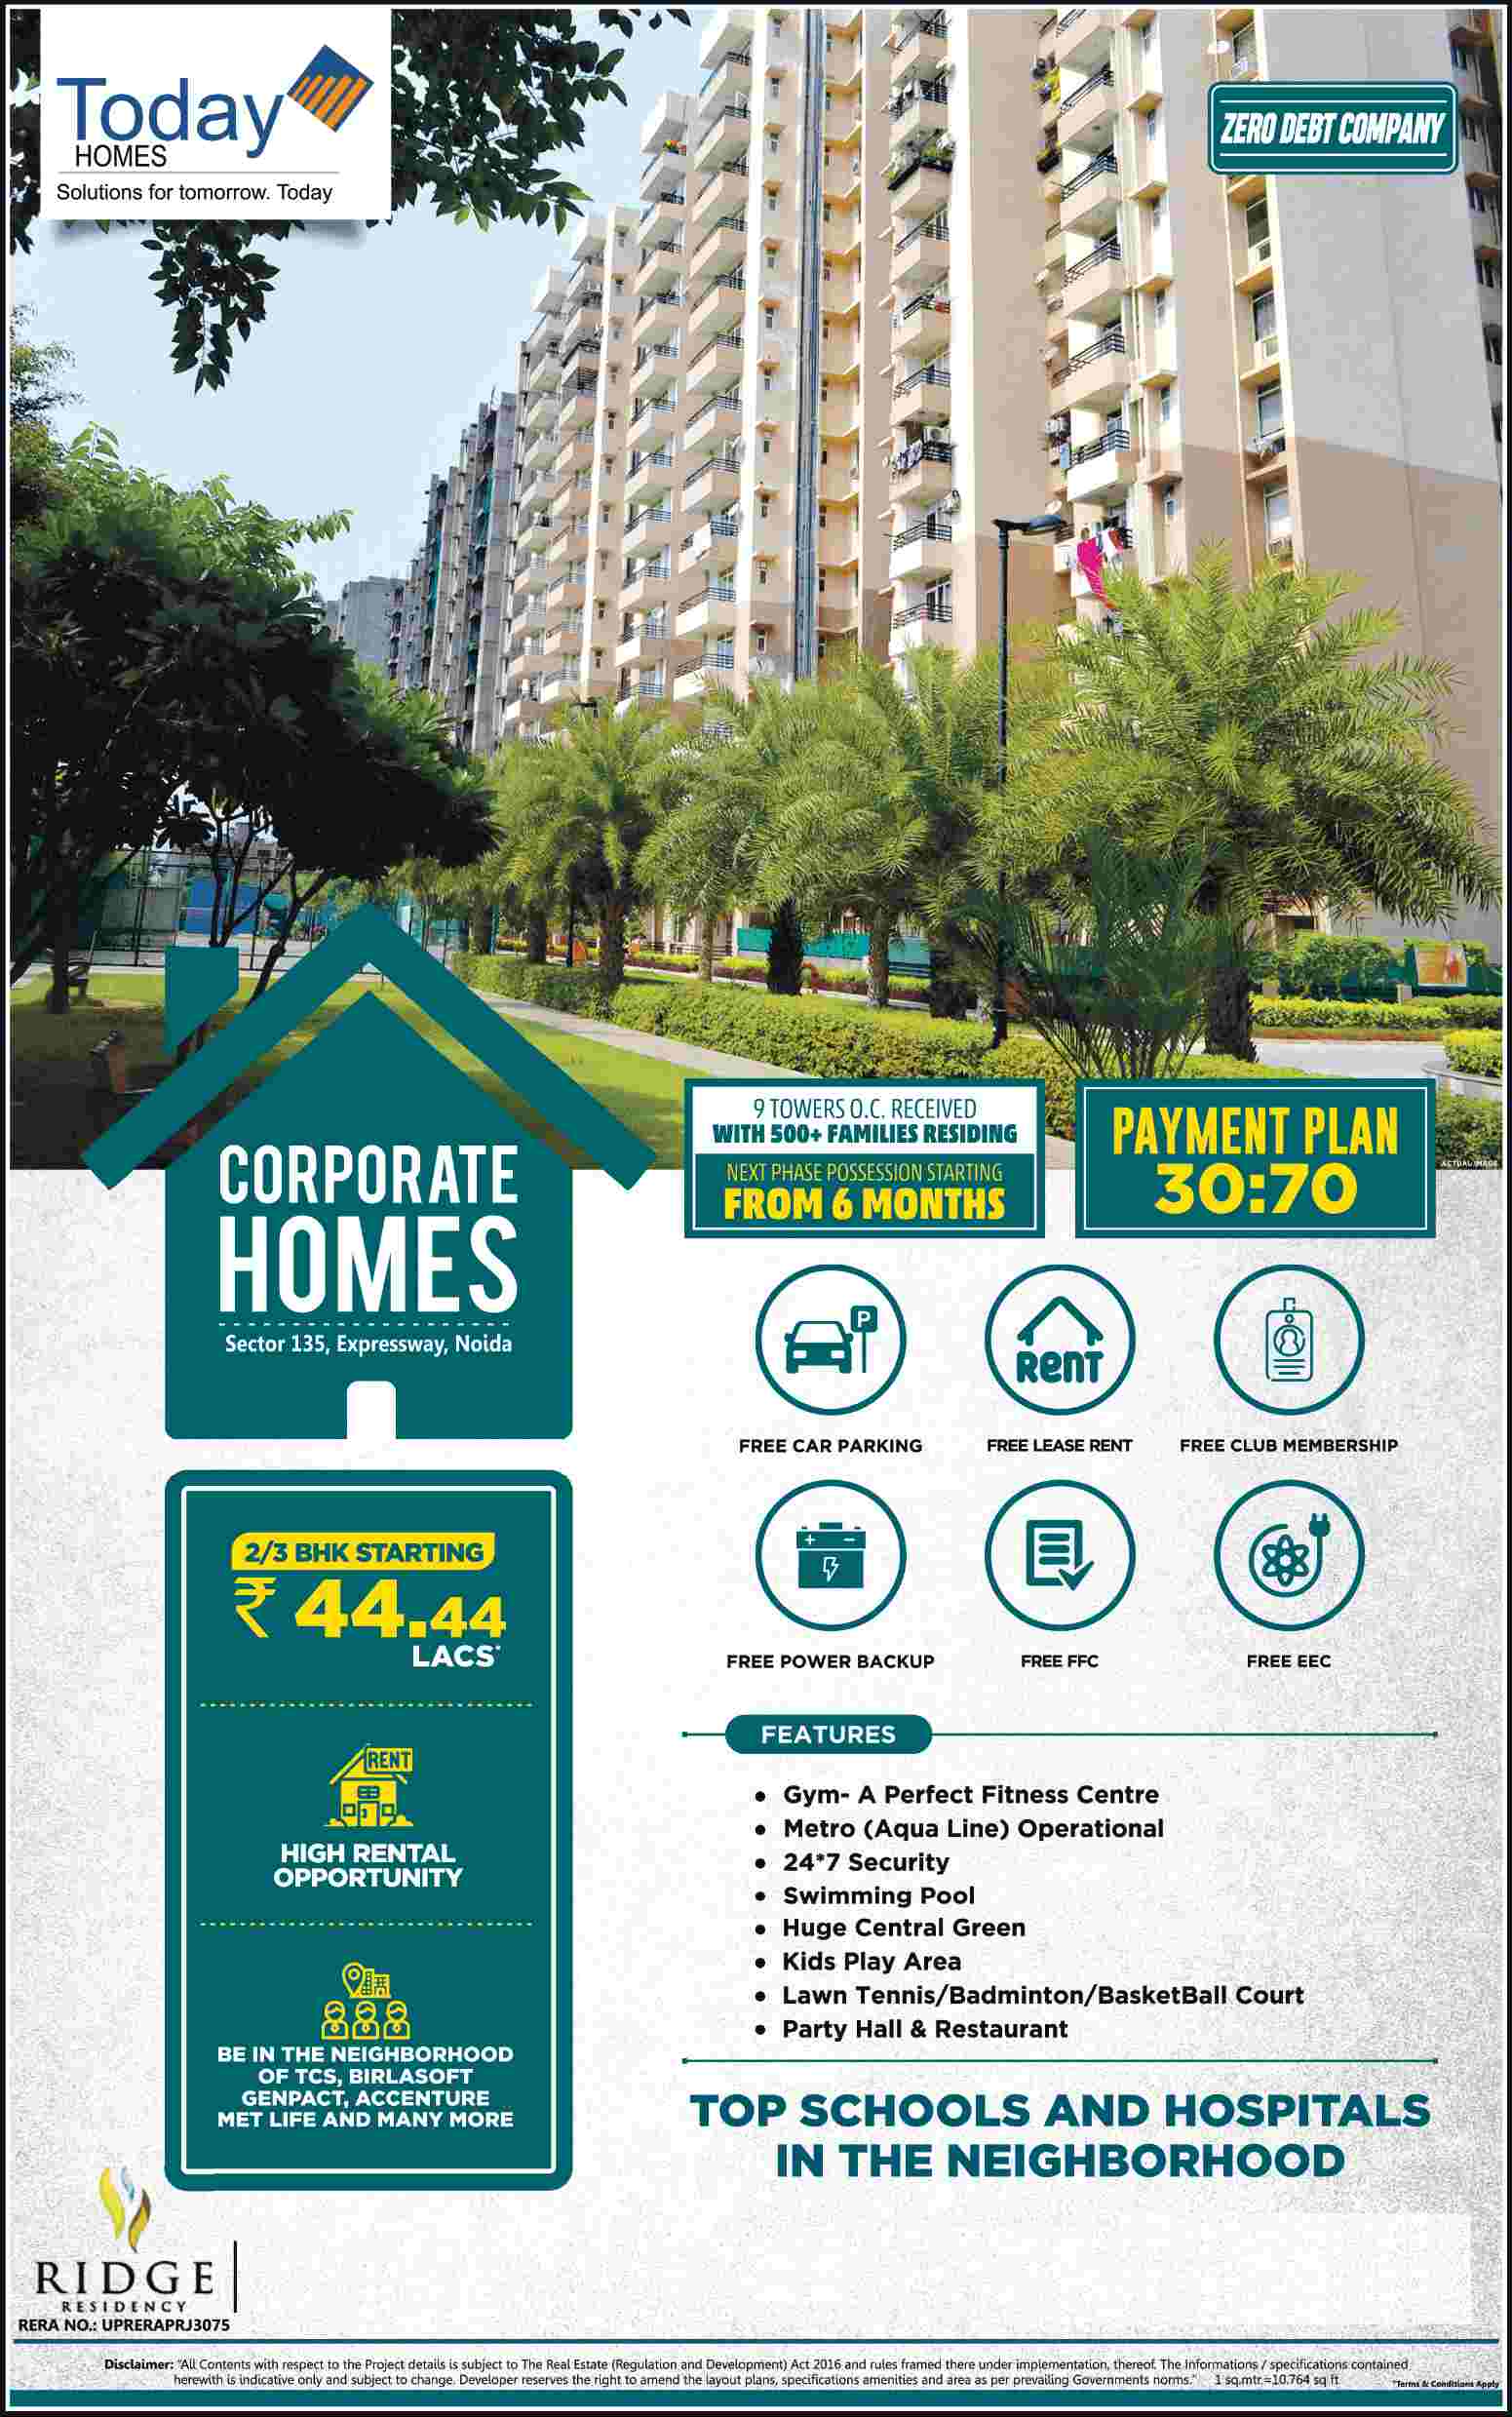 Book 2 & 3 BHK apartments @ Rs 44.44 Lacs at Today Ridge Residency in Sector 135, Noida